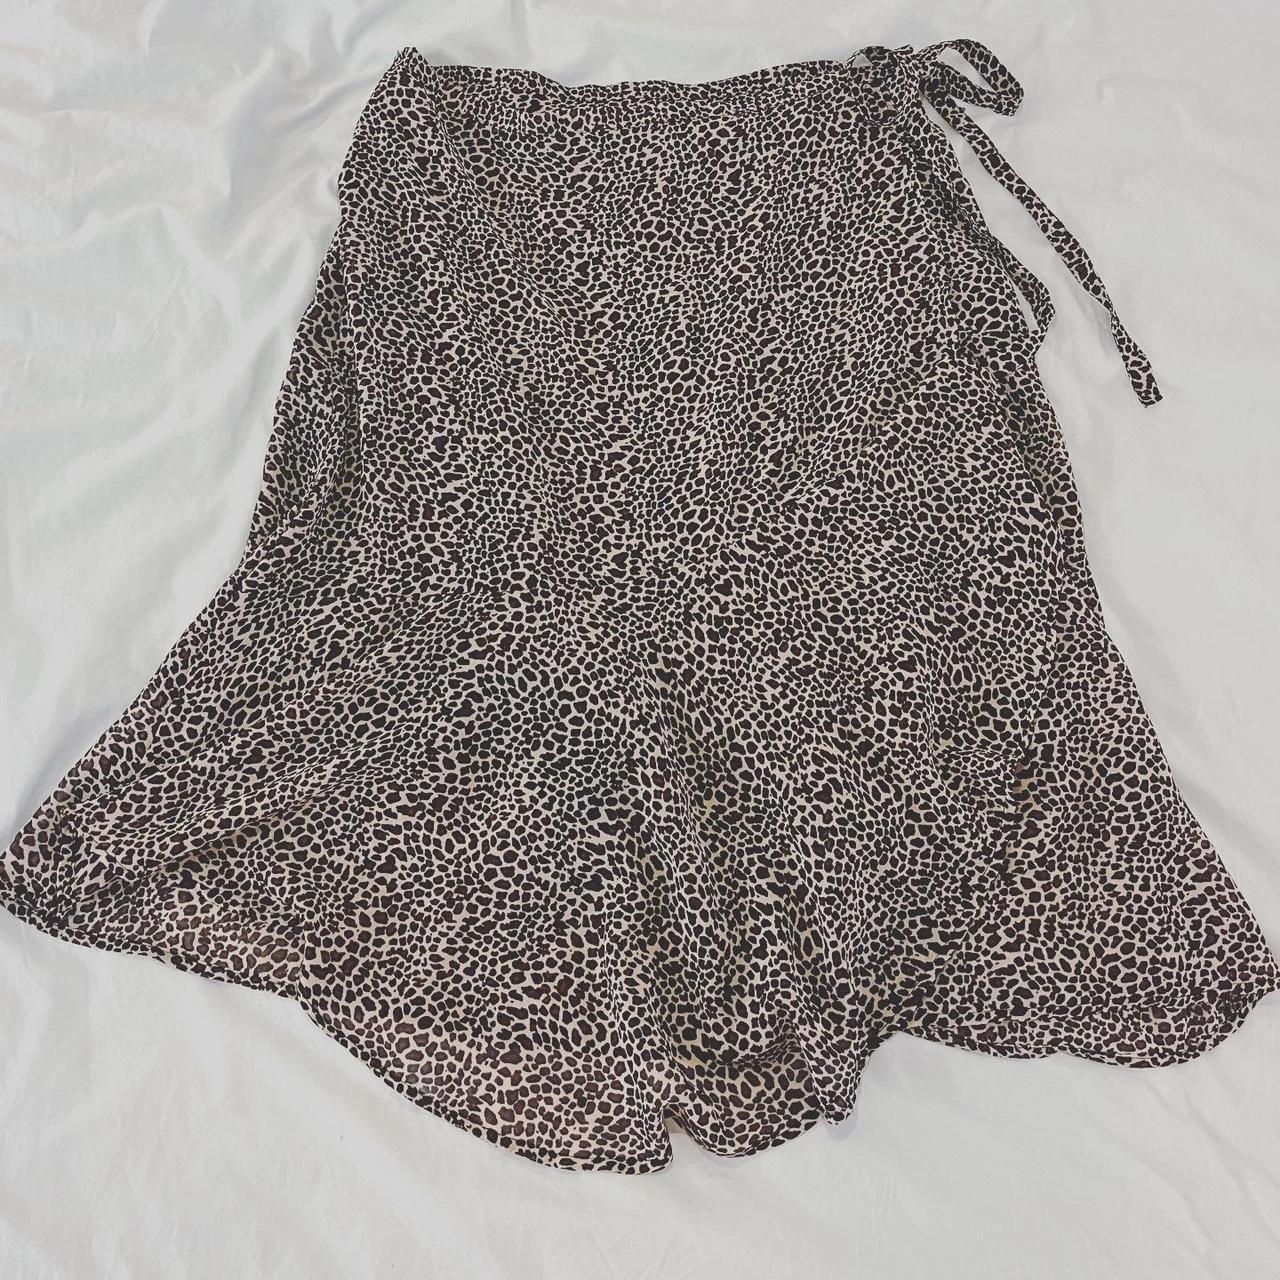 French Connection, Cheetah Chiffon Wrap Skirt with...